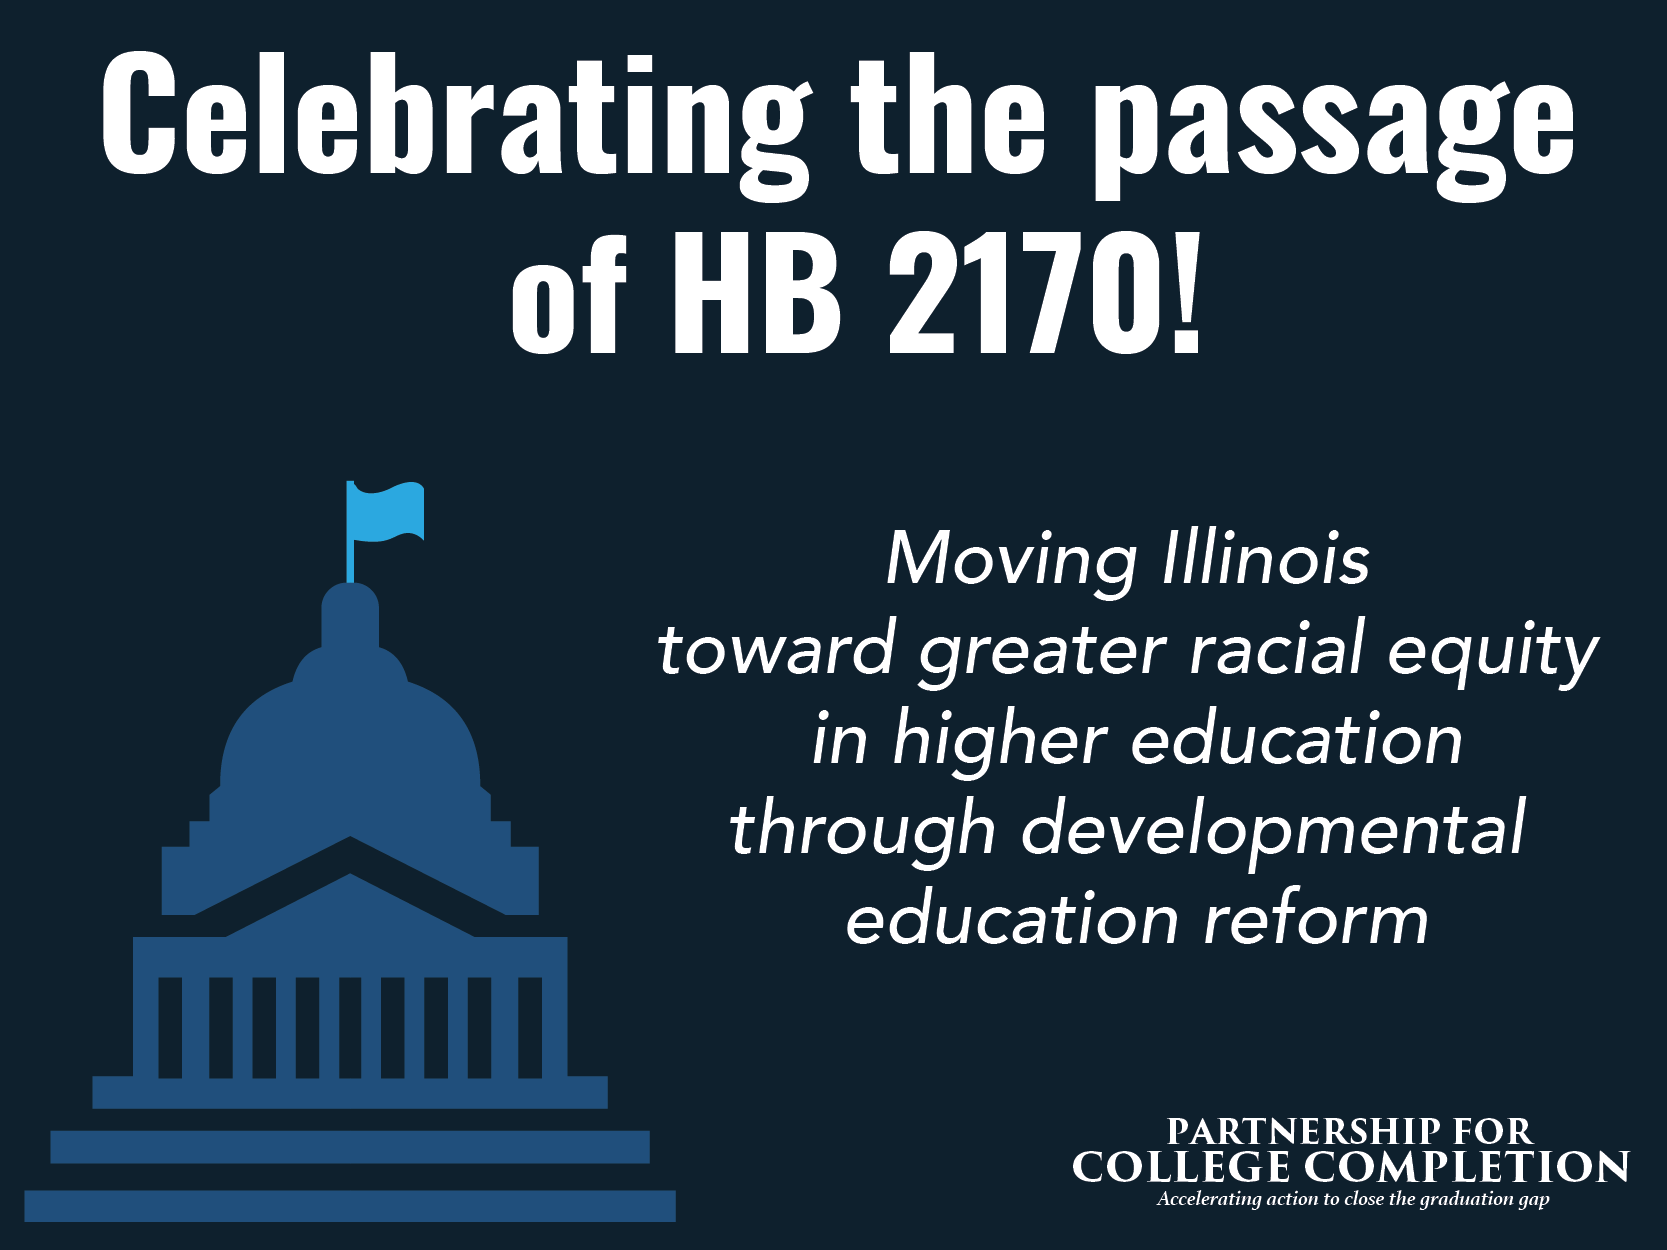 Celebrating the passage of HB 2170!